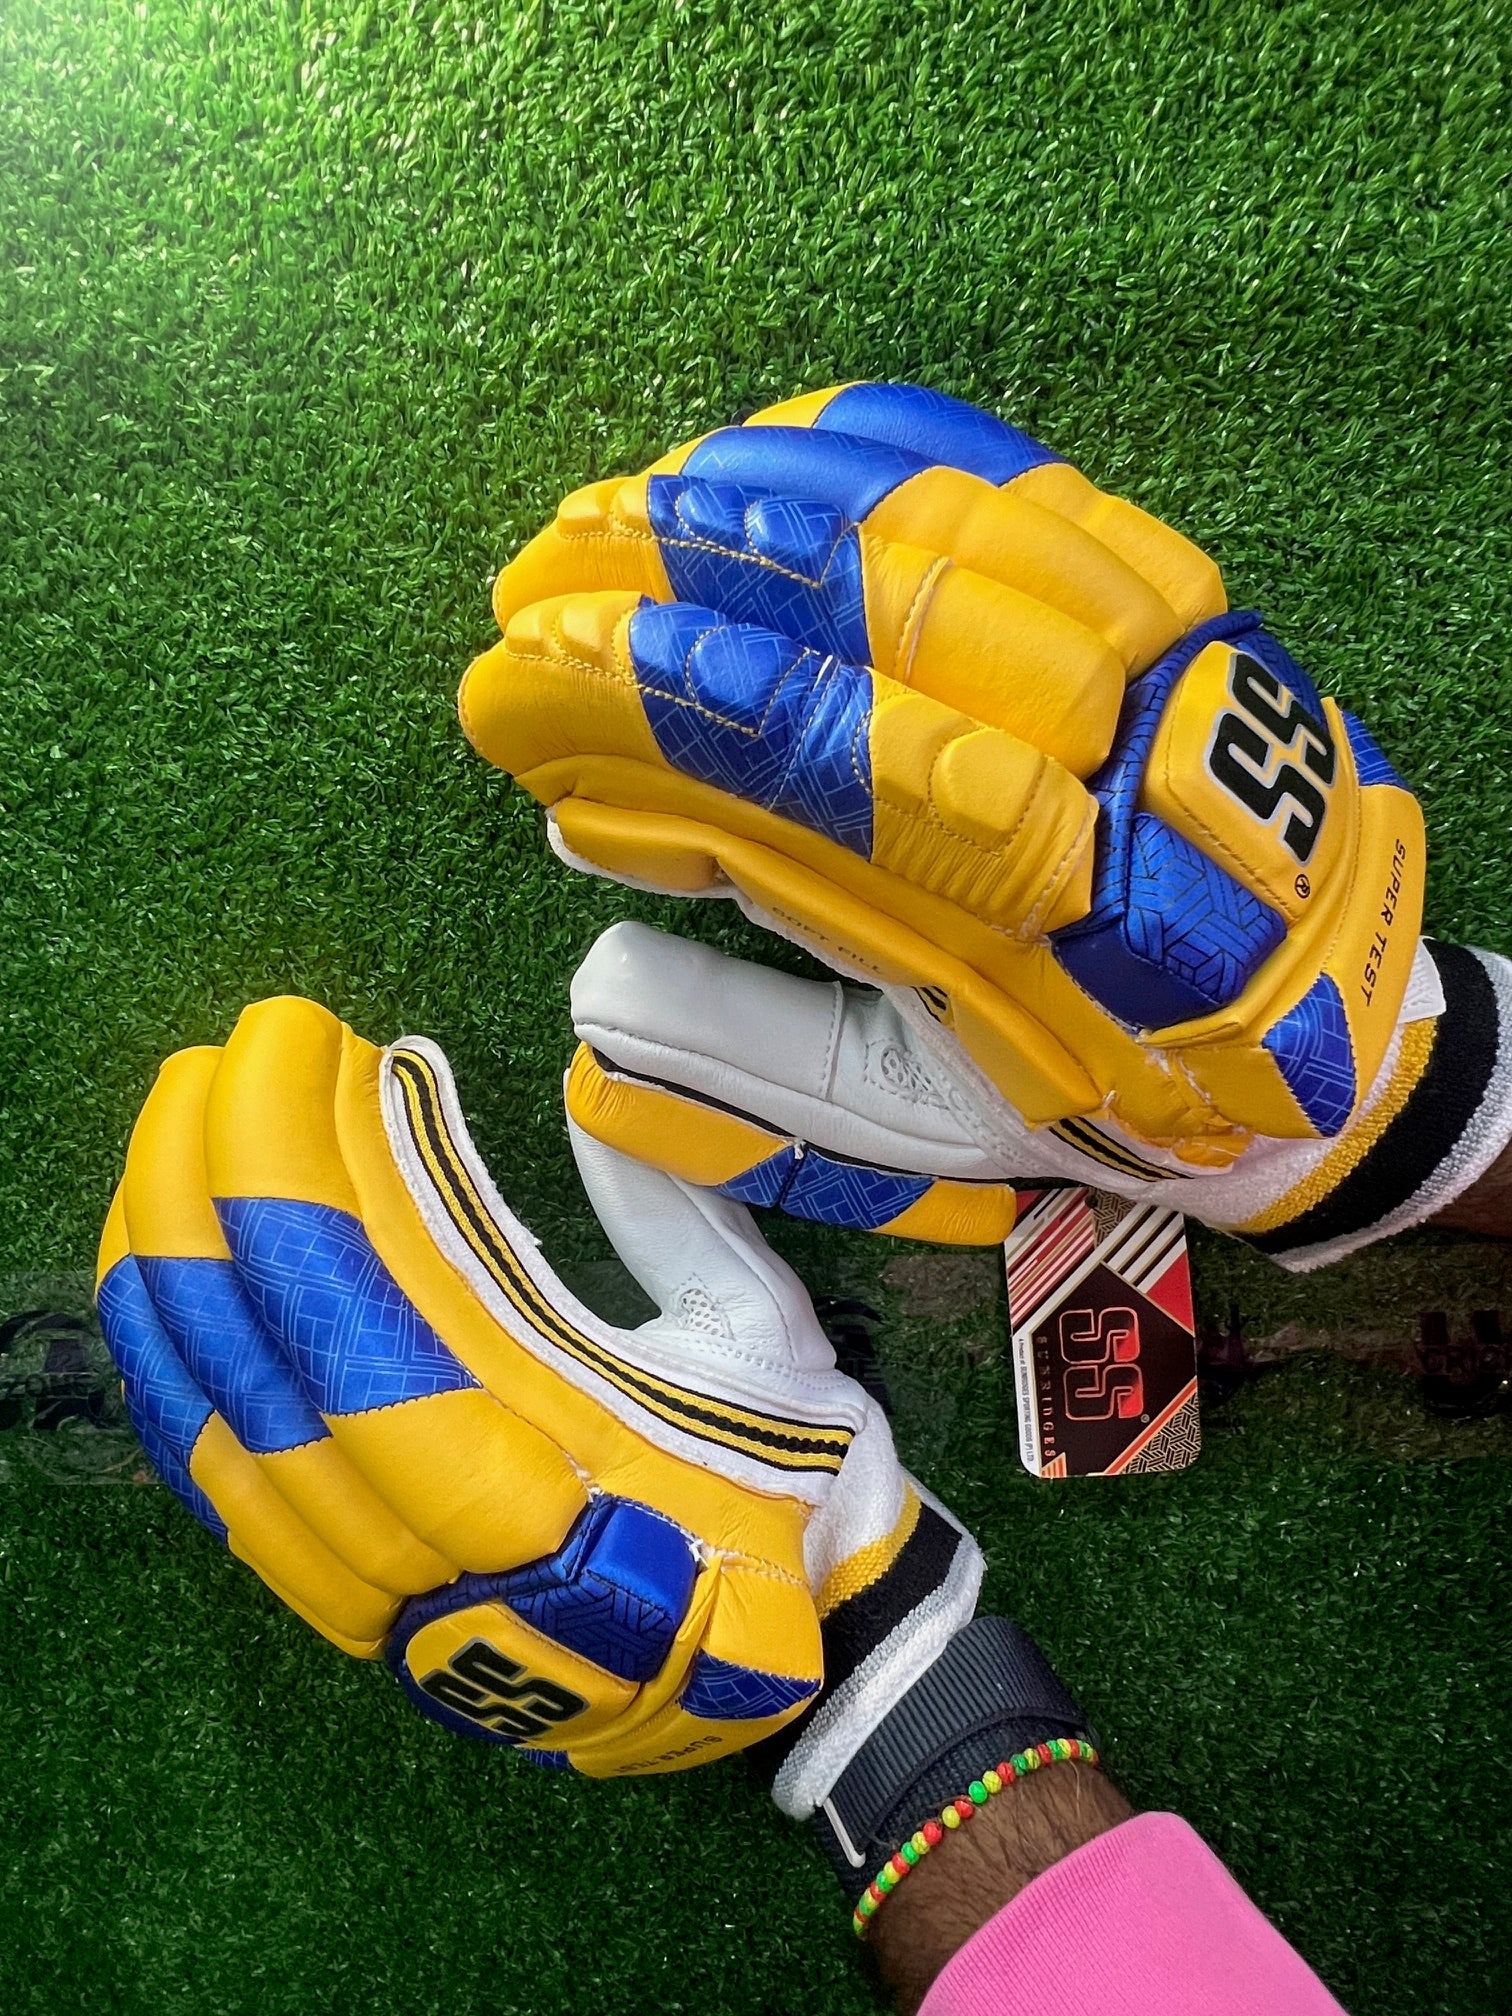 SS Super Test IPL Yellow Colored Batting Gloves - 2024